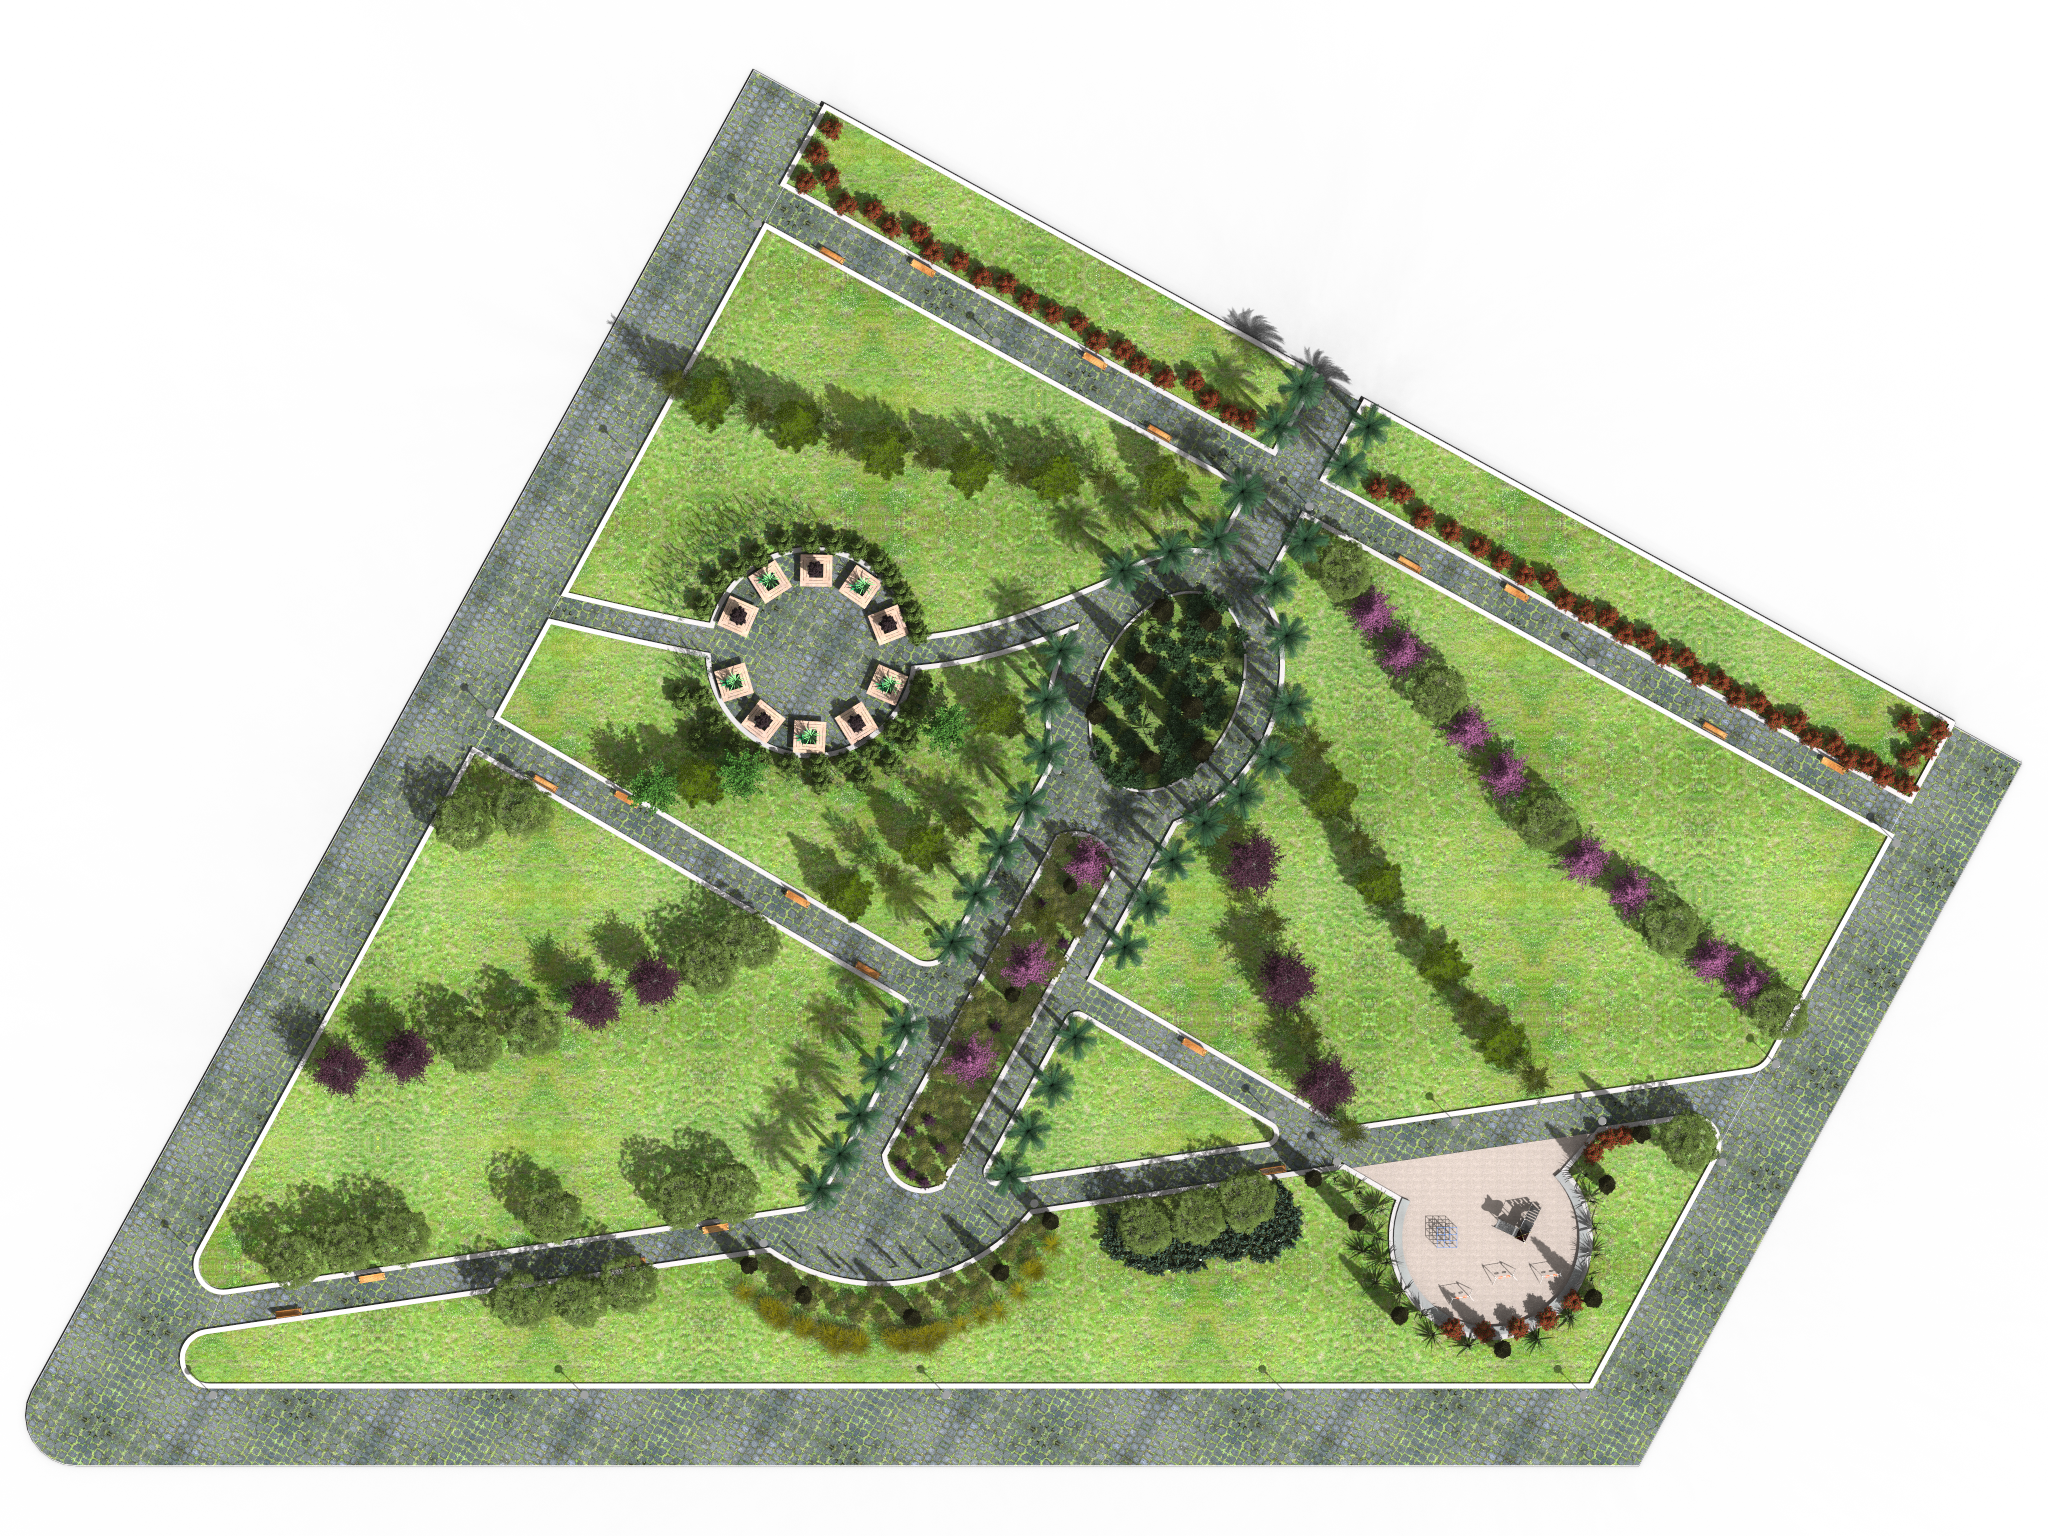 Public Square. Rendered plan view